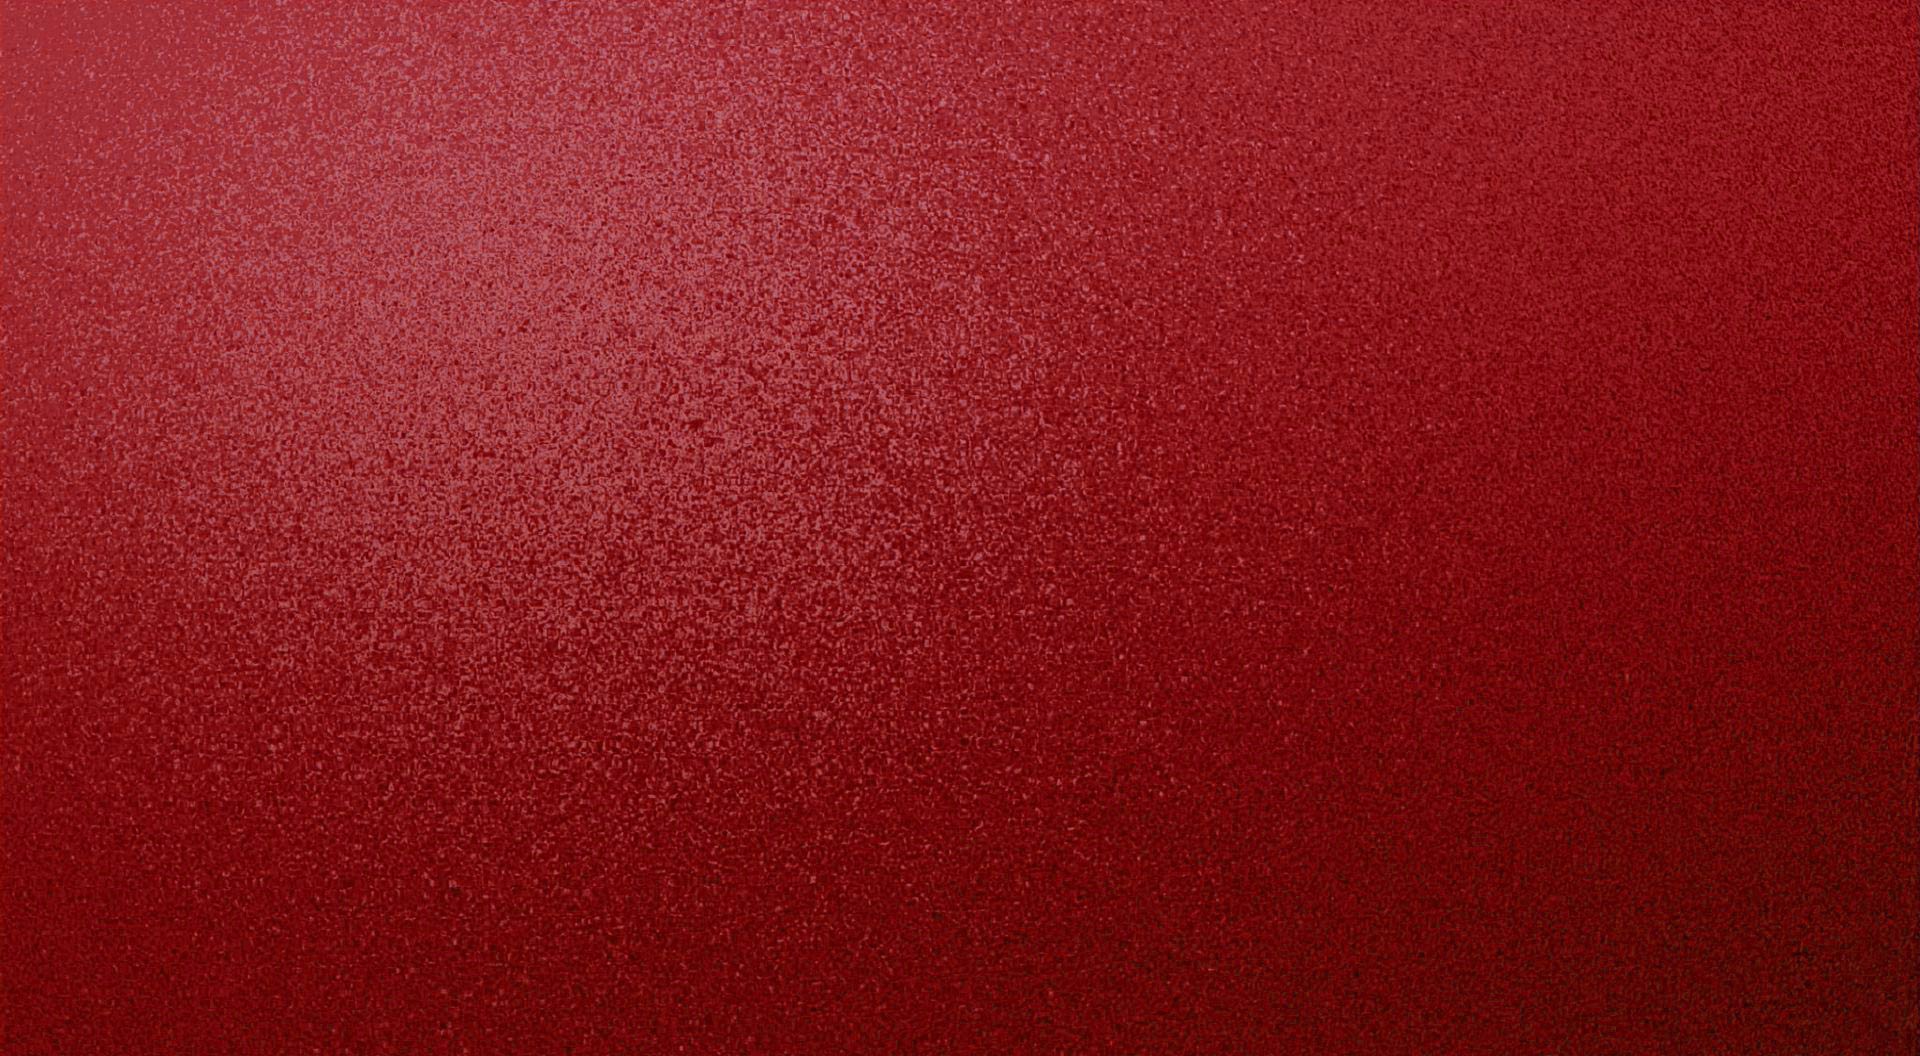 Texture Wall Paper Grasscloth Wallpaper Red Textured Speckled